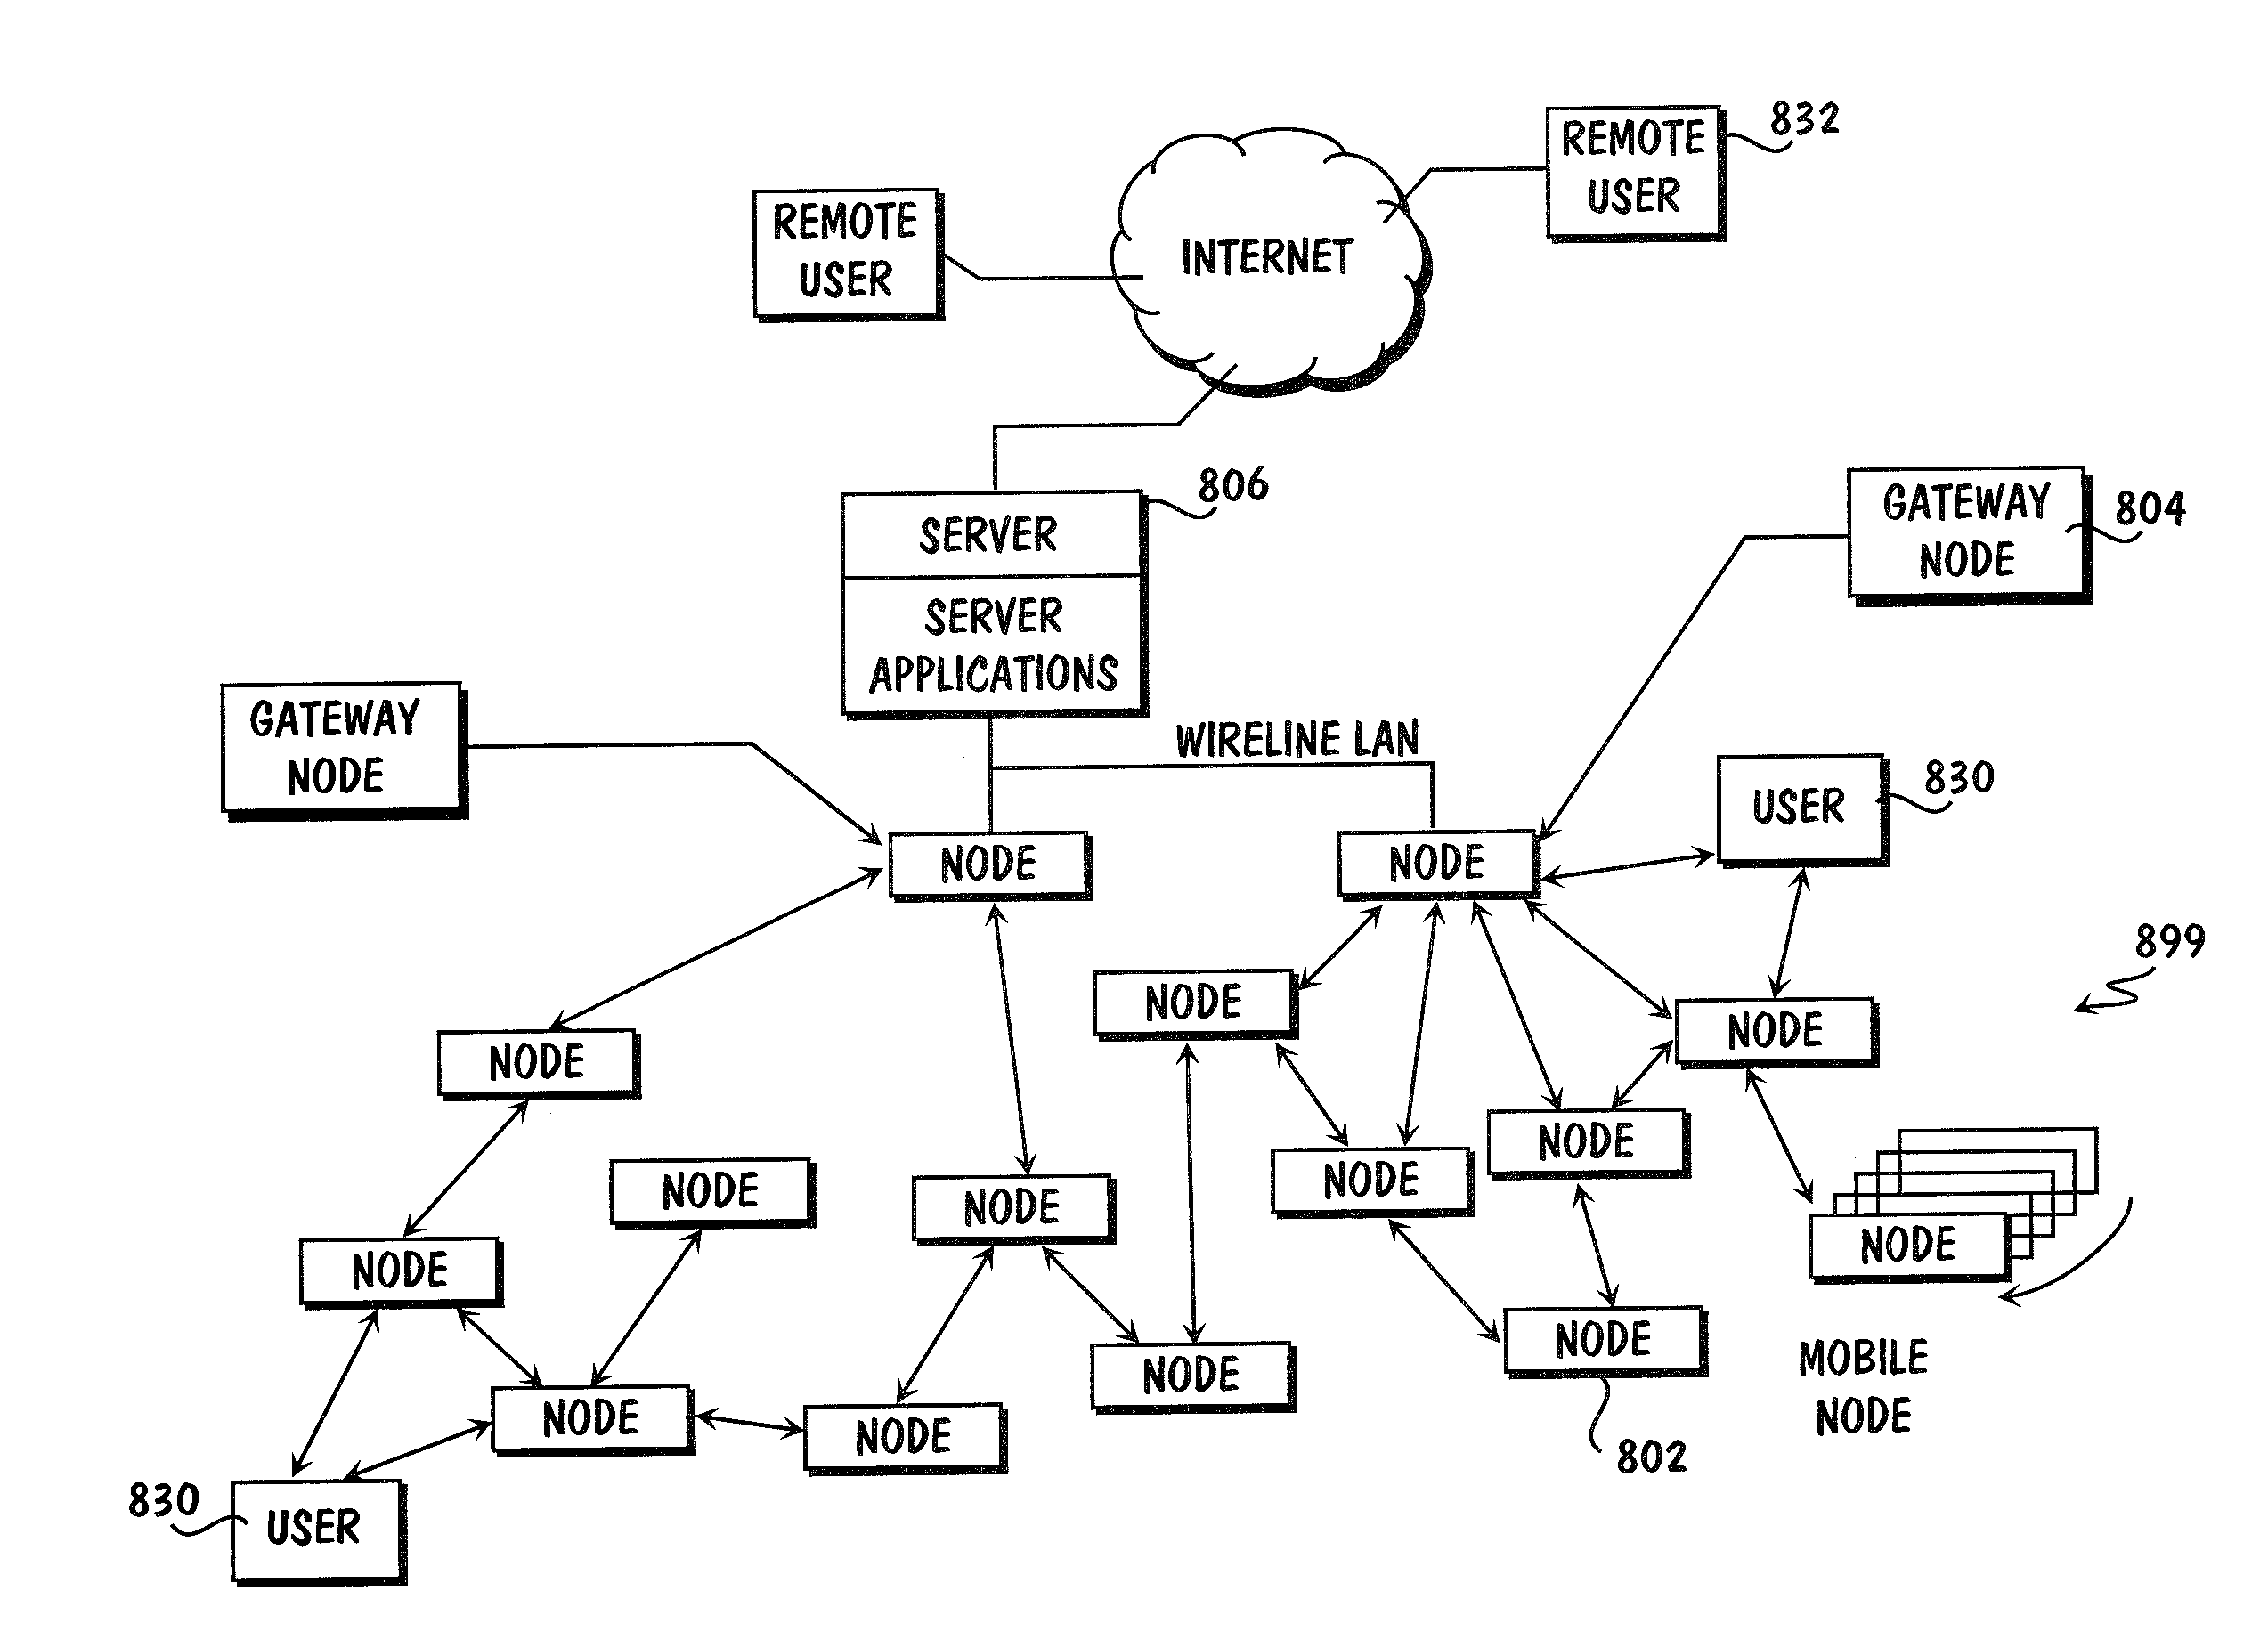 Apparatus for internetworked wireless integrated network sensors (WINS)